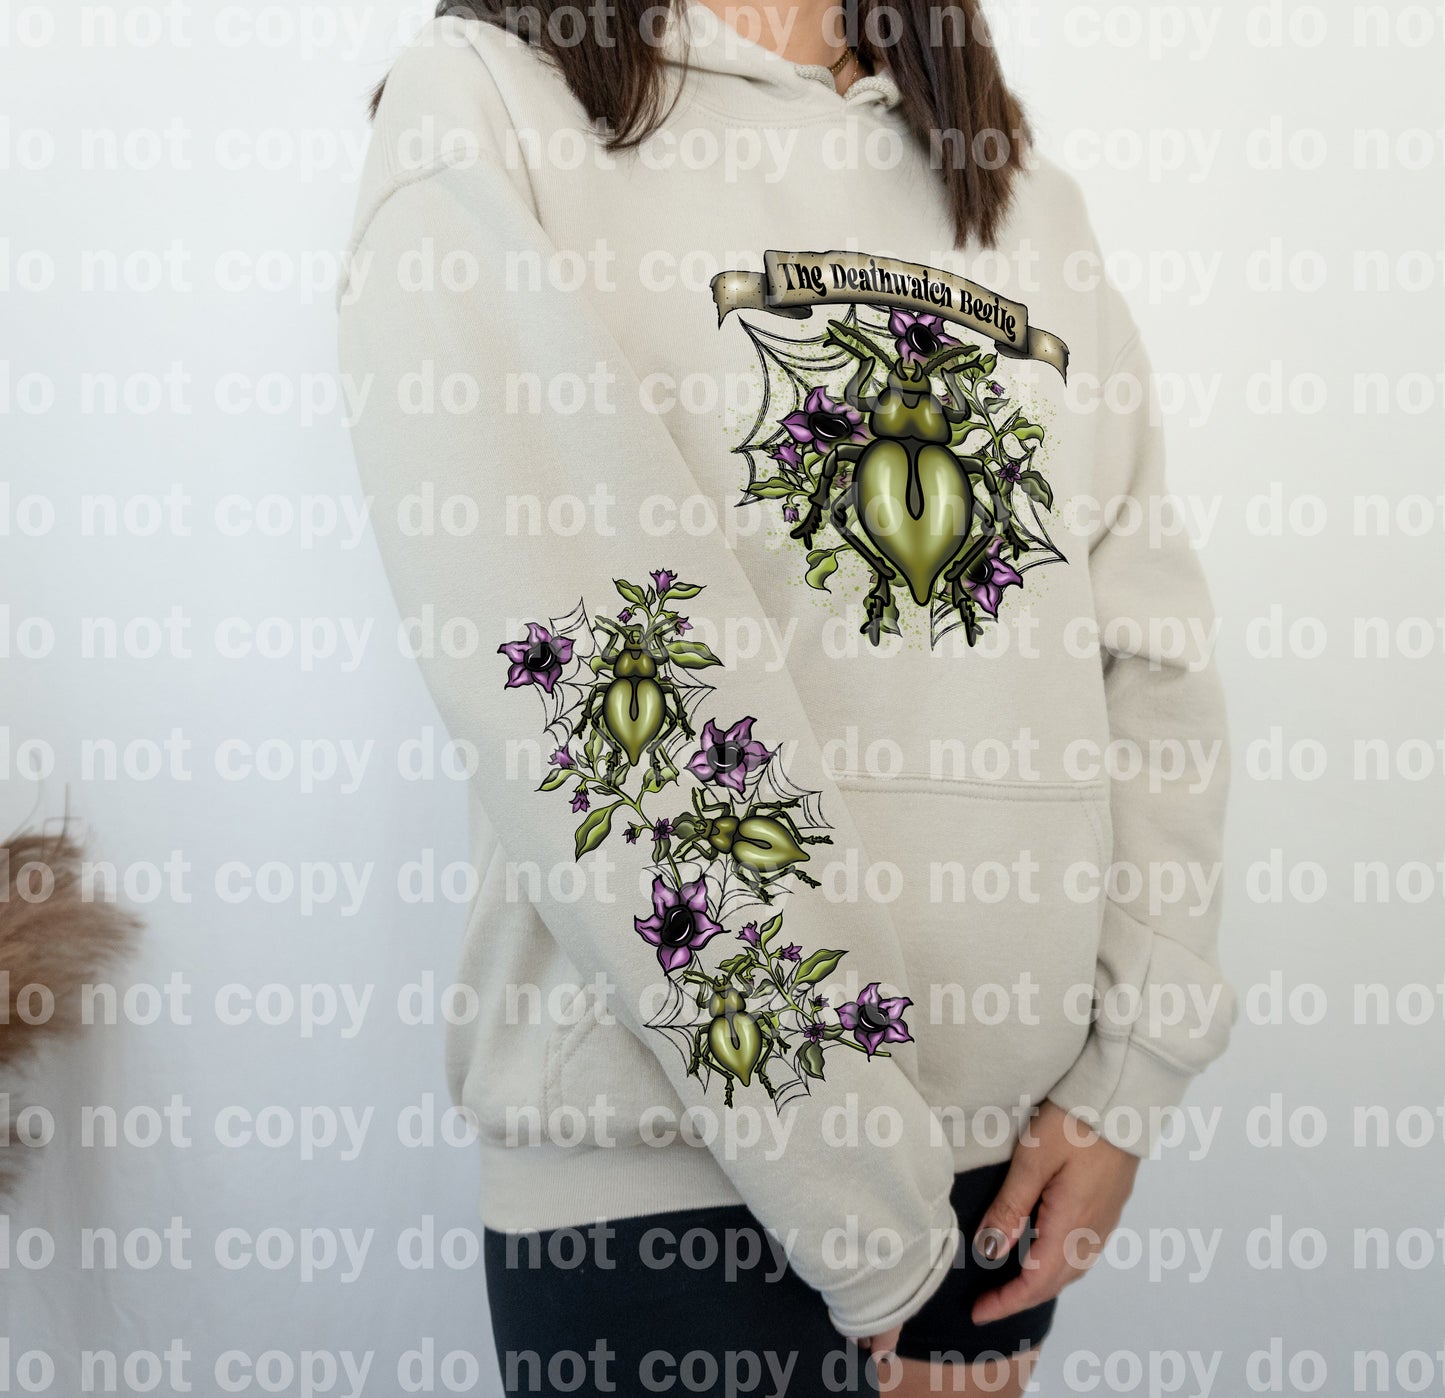 The Death Watch Beetle with Optional Sleeve Design Dream Print or Sublimation Print